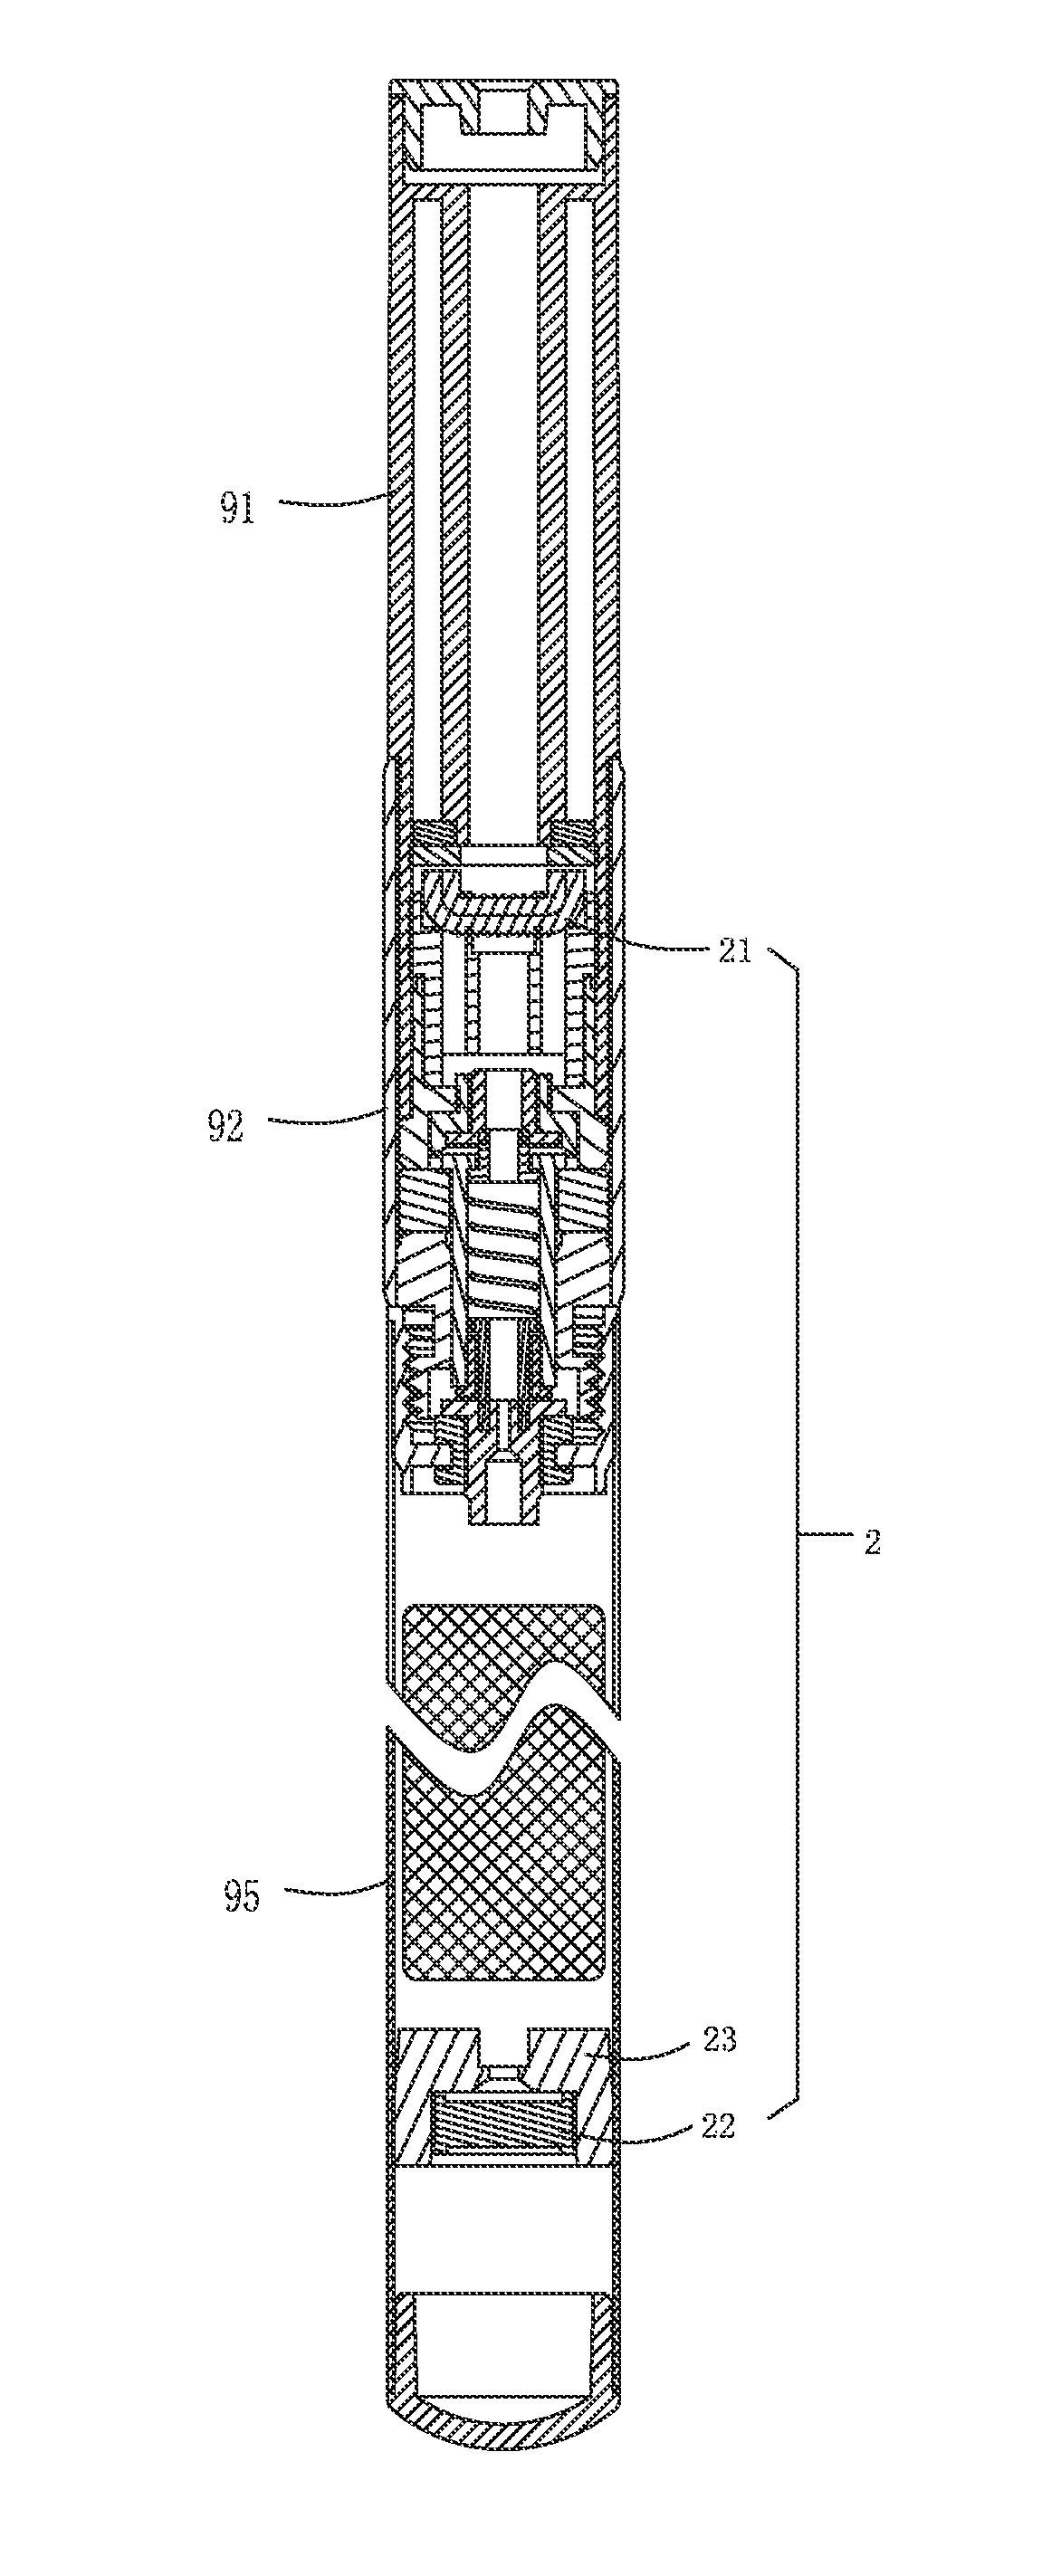 Electronic Cigarette Having A Connector for Magnetic Connection